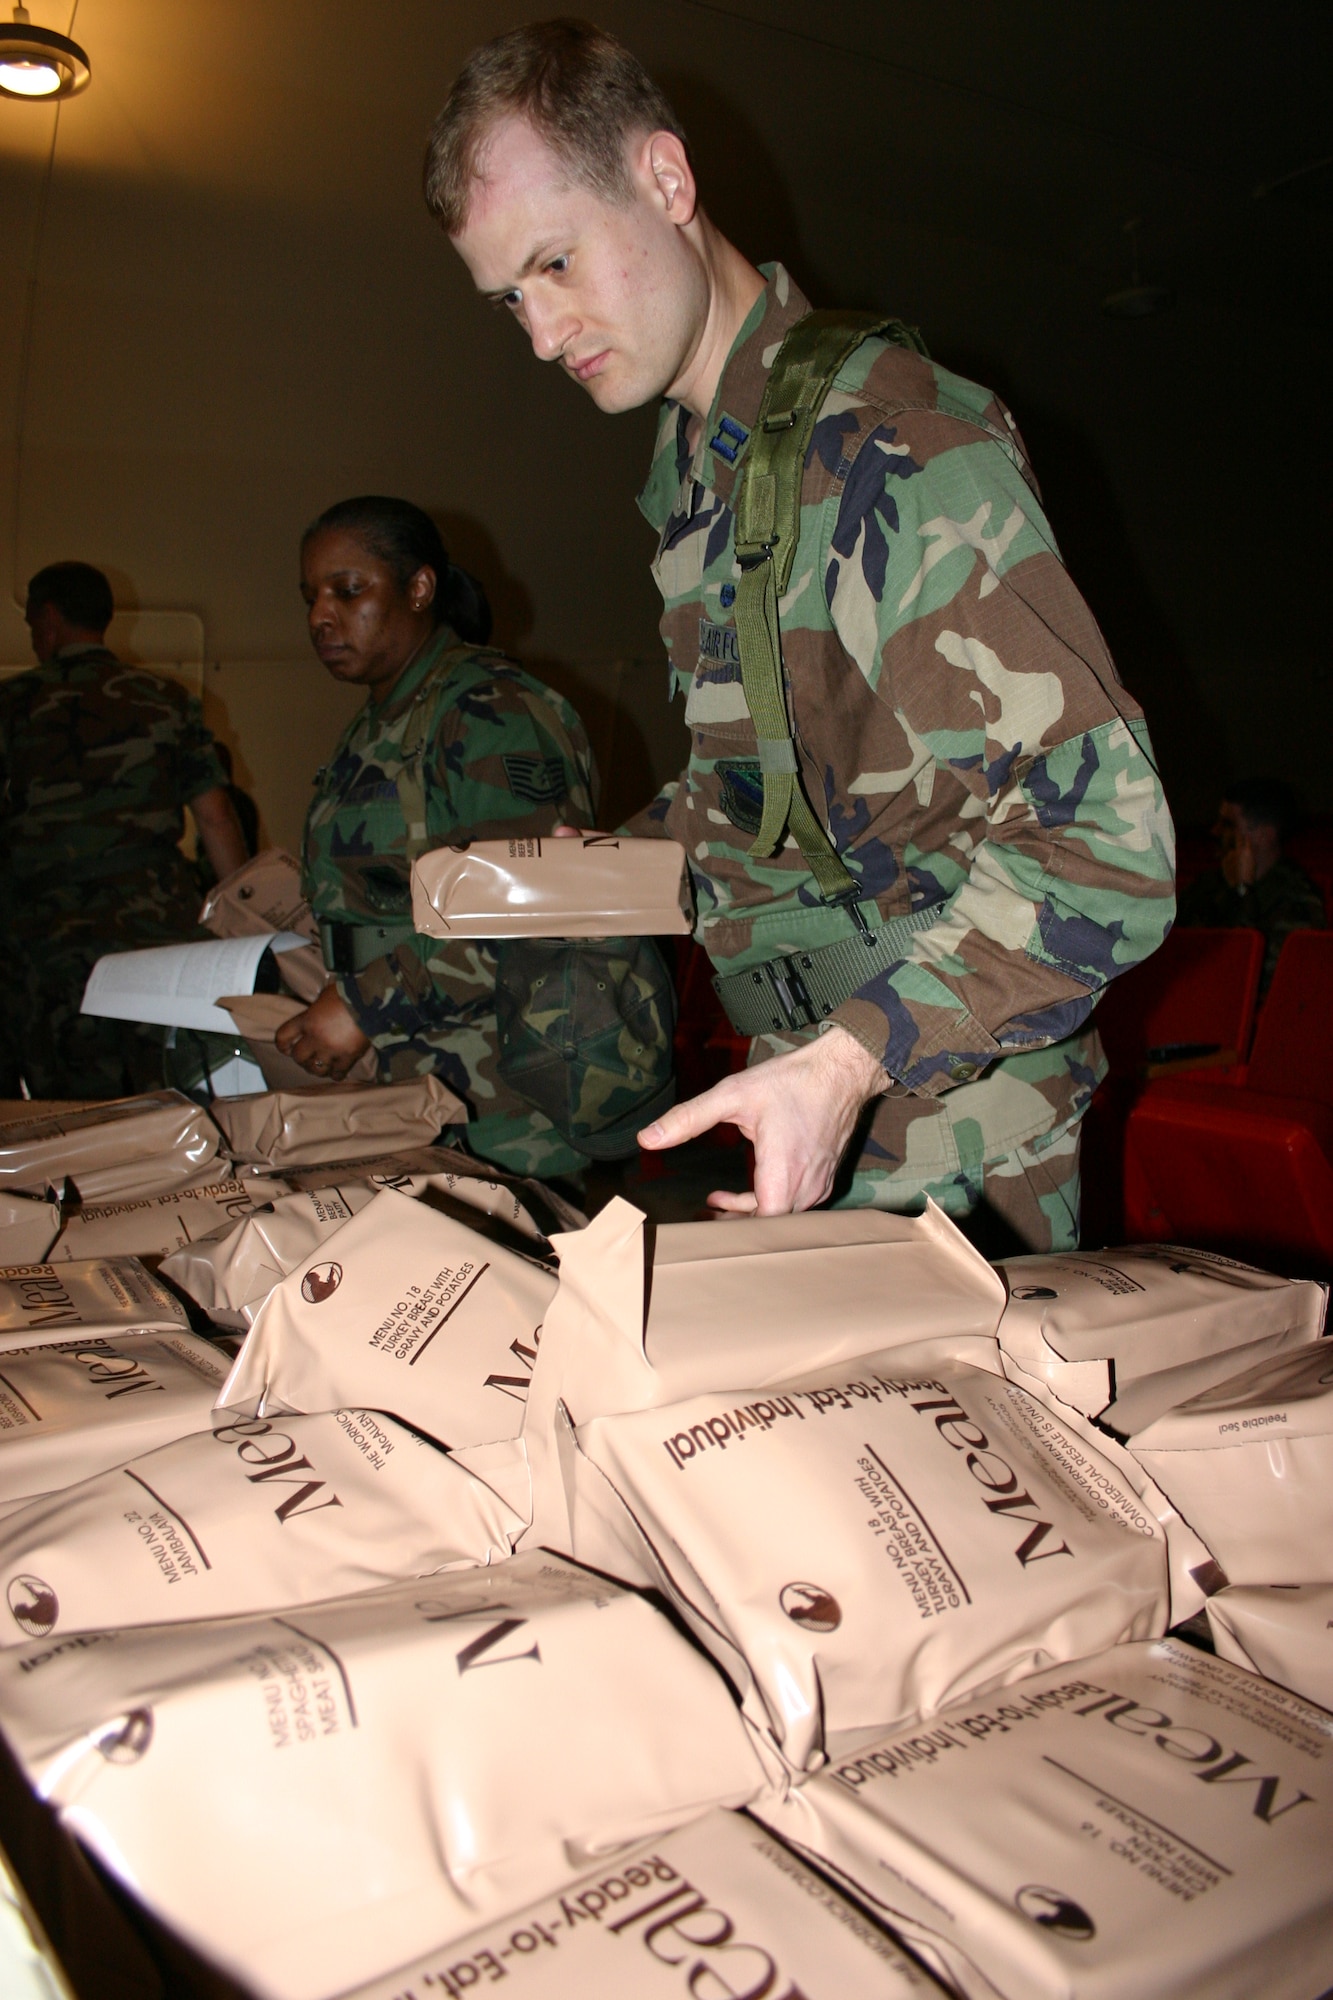 HAWAII -- Capt. Matthew Hill, 3 WG/JA, Elmendorf AFB, Alaska, selects meals ready-to-eat to get him through the five-day Pacific Joint Legal Exercise. Capt. Hill is one of nearly 30 legal professionals participating in PACJOLE at the Pohakuloa Training Area on the island of Hawaii this week.